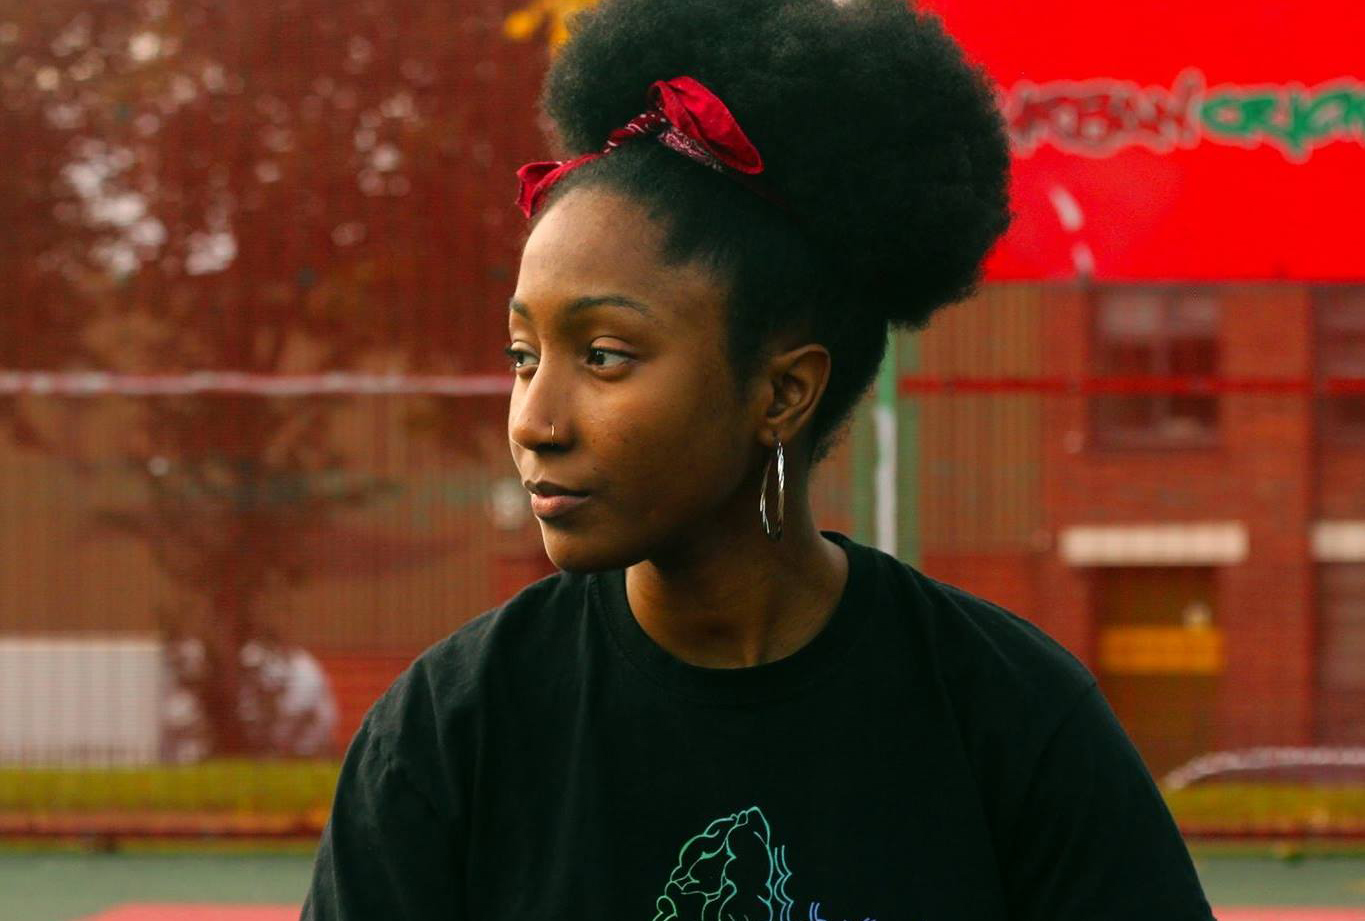 Lady Sanity is an emerging young rap artist from Birmingham